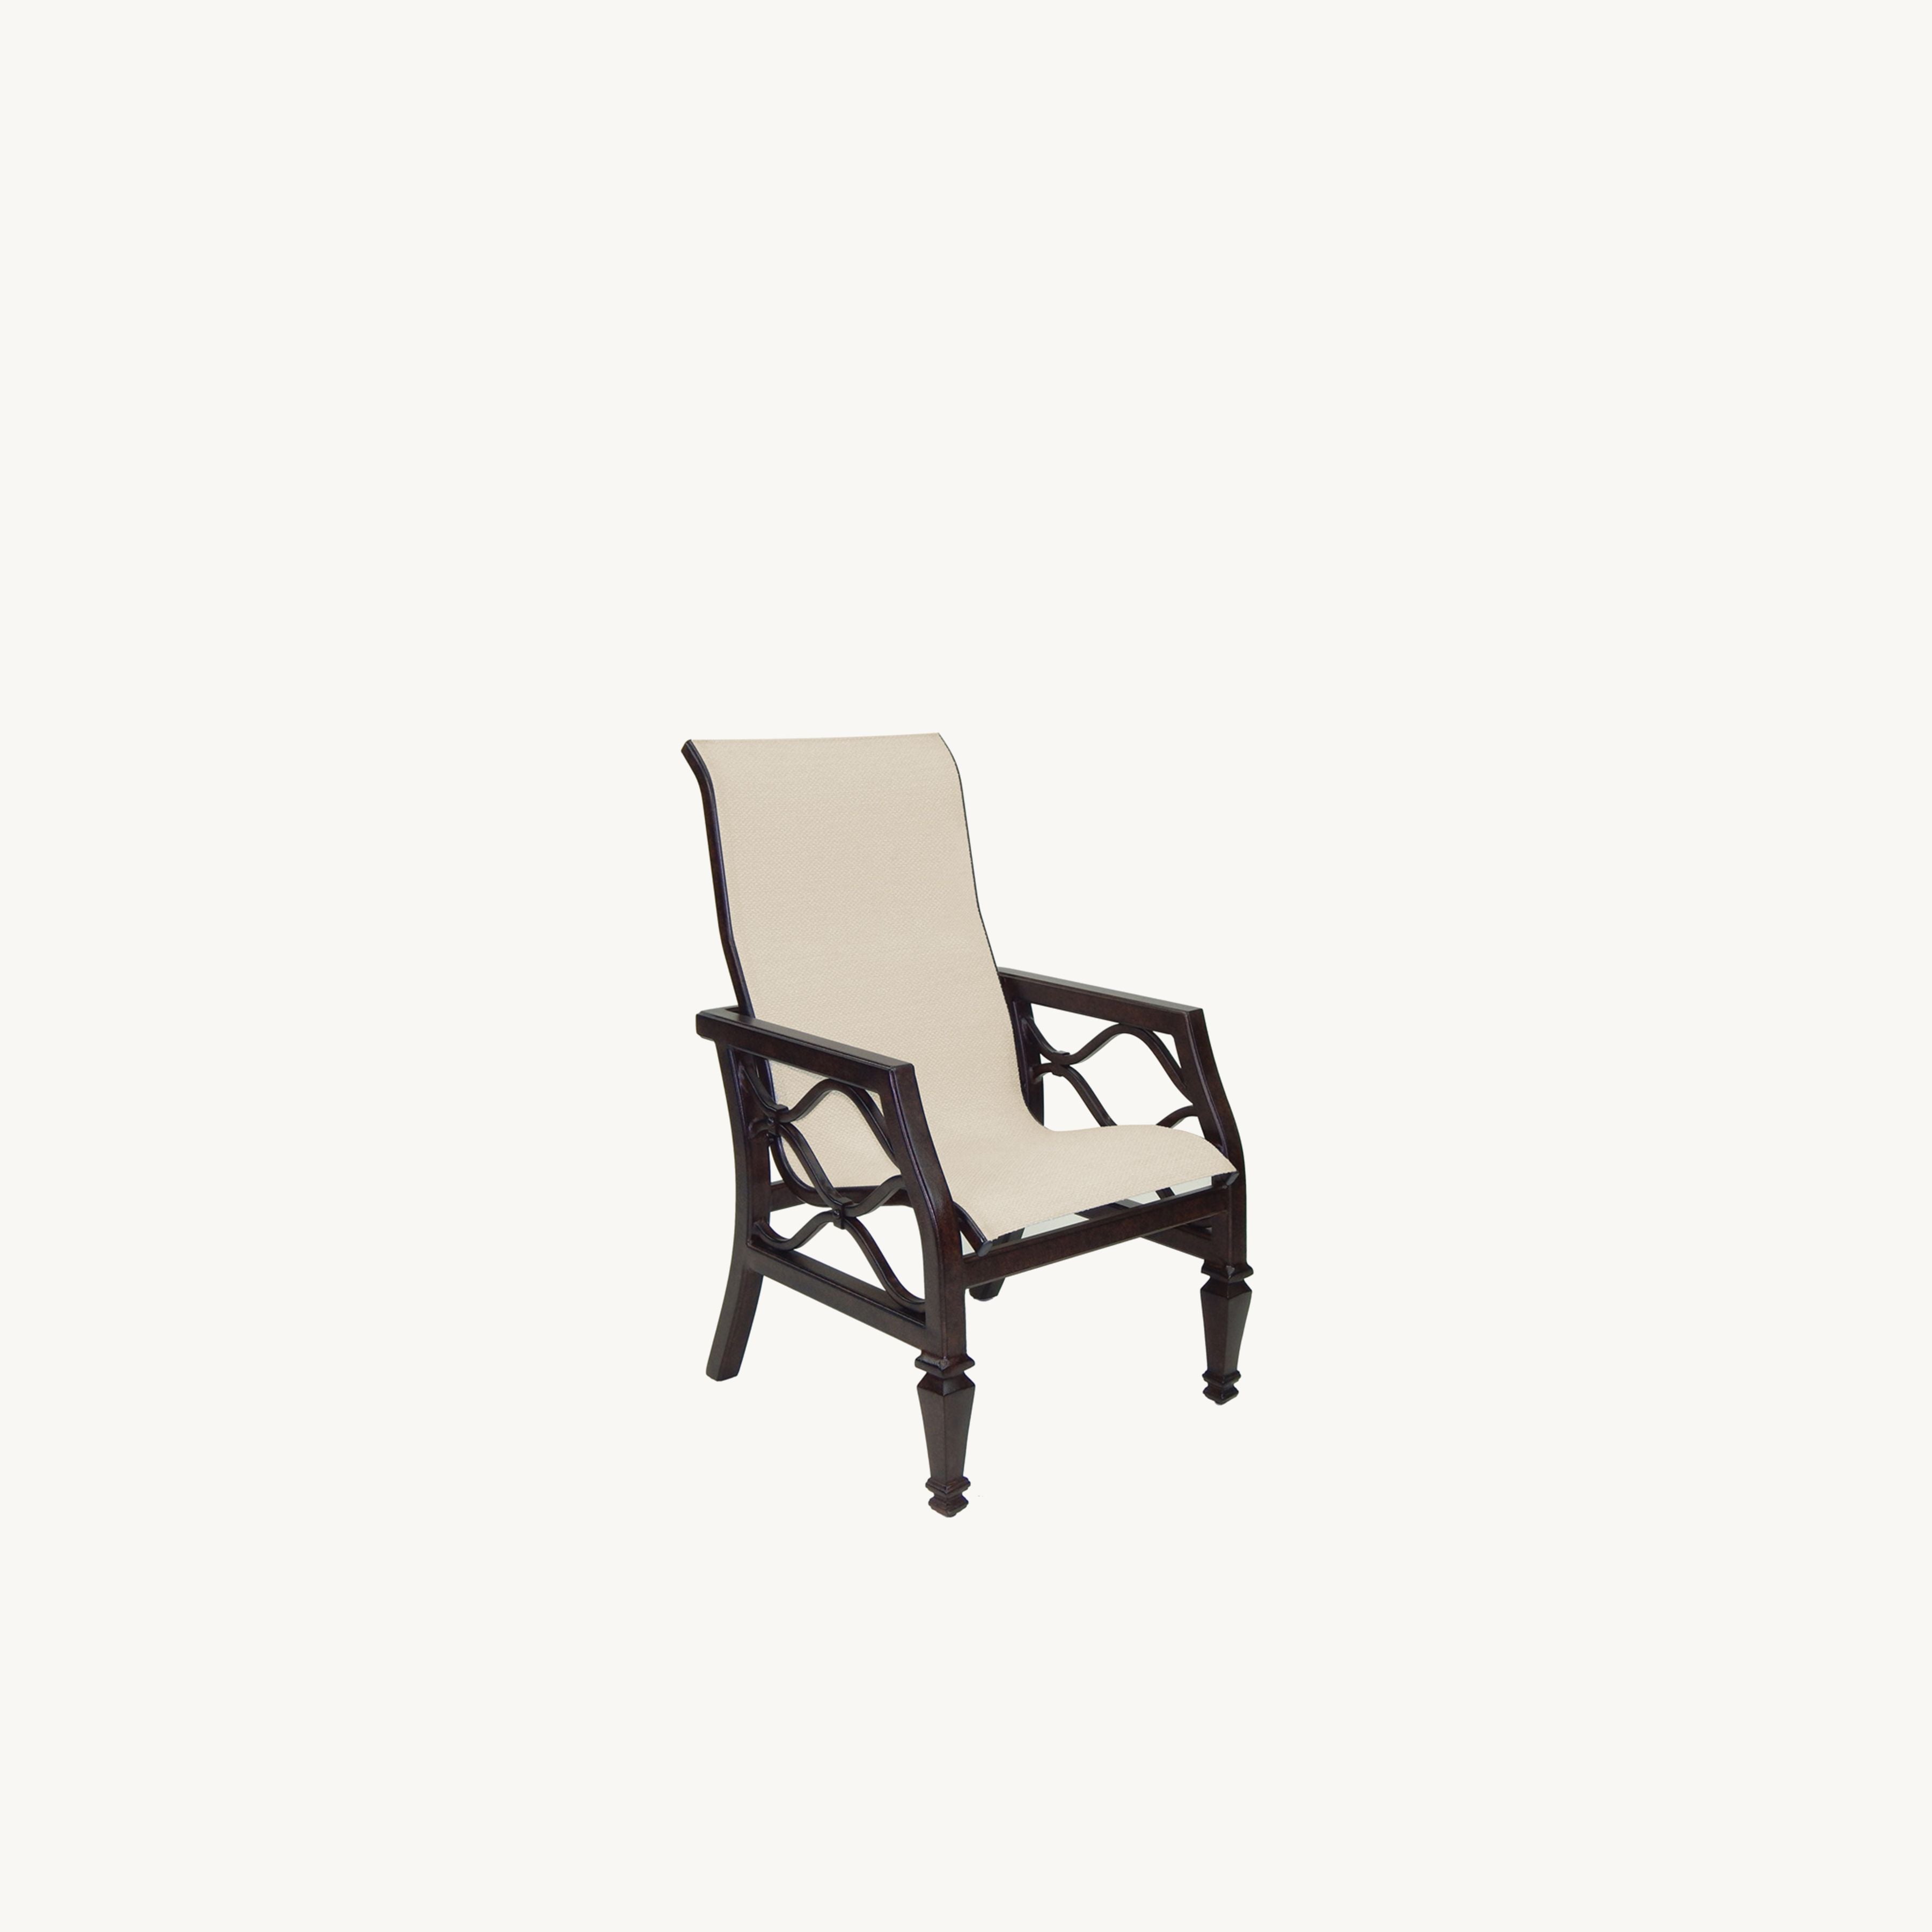 Villa Bianca Sling Dining Chair By Castelle